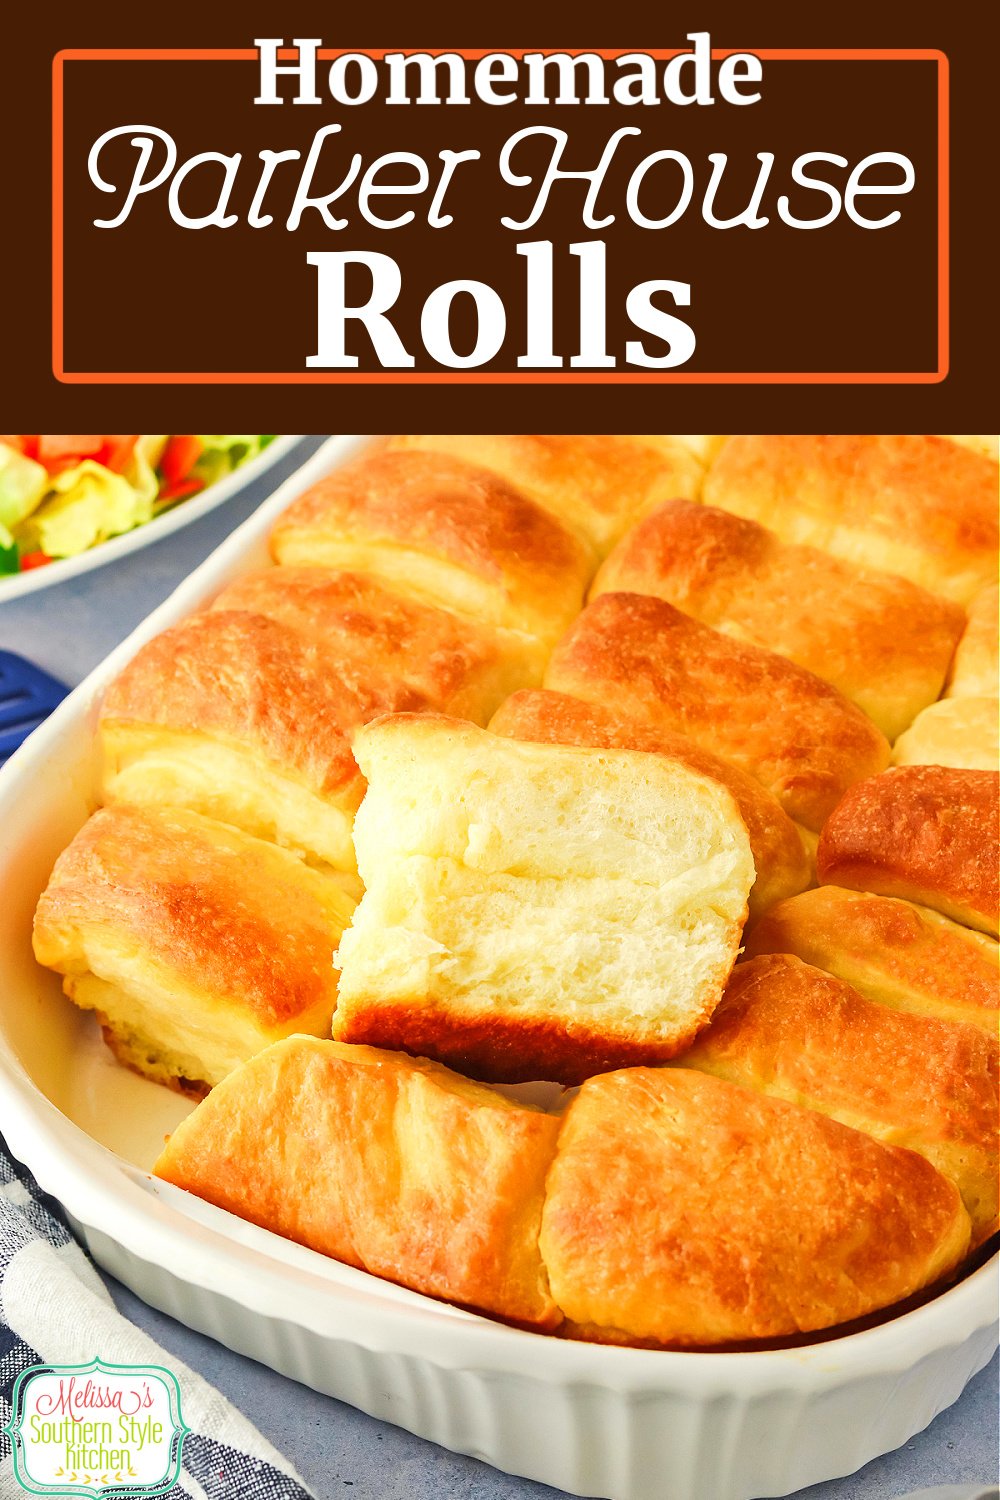 This recipe for homemade Parker House Rolls results in soft and pillowy buttery rolls making the perfect side dish for any meal.  #rolls #parkerhouserolls #breadrecipes #homemaderolls #yeastrolls via @melissasssk